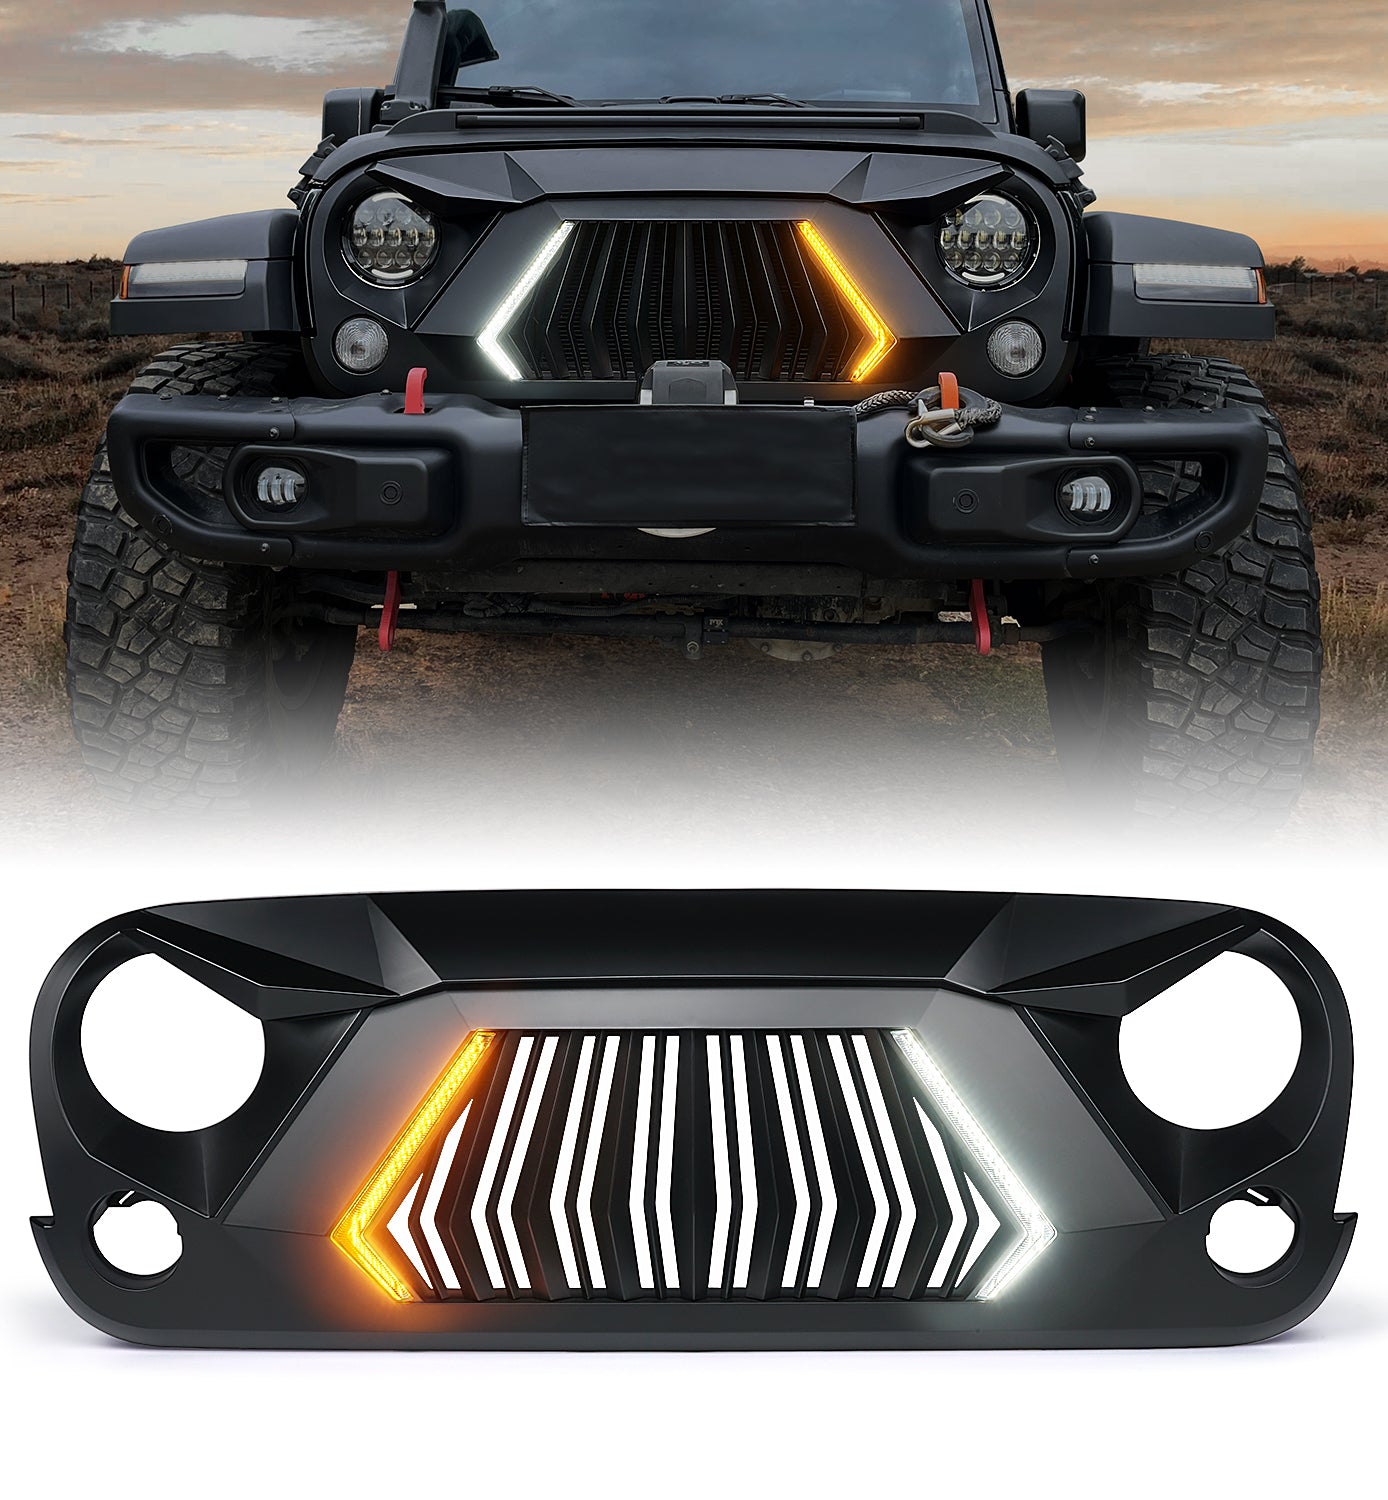 Front Grill Compatible with 2007-2018 Jeep Wrangler JK JKU, Unique Patented Design Grille w/ Running and Turn Signals Light, Matte Black